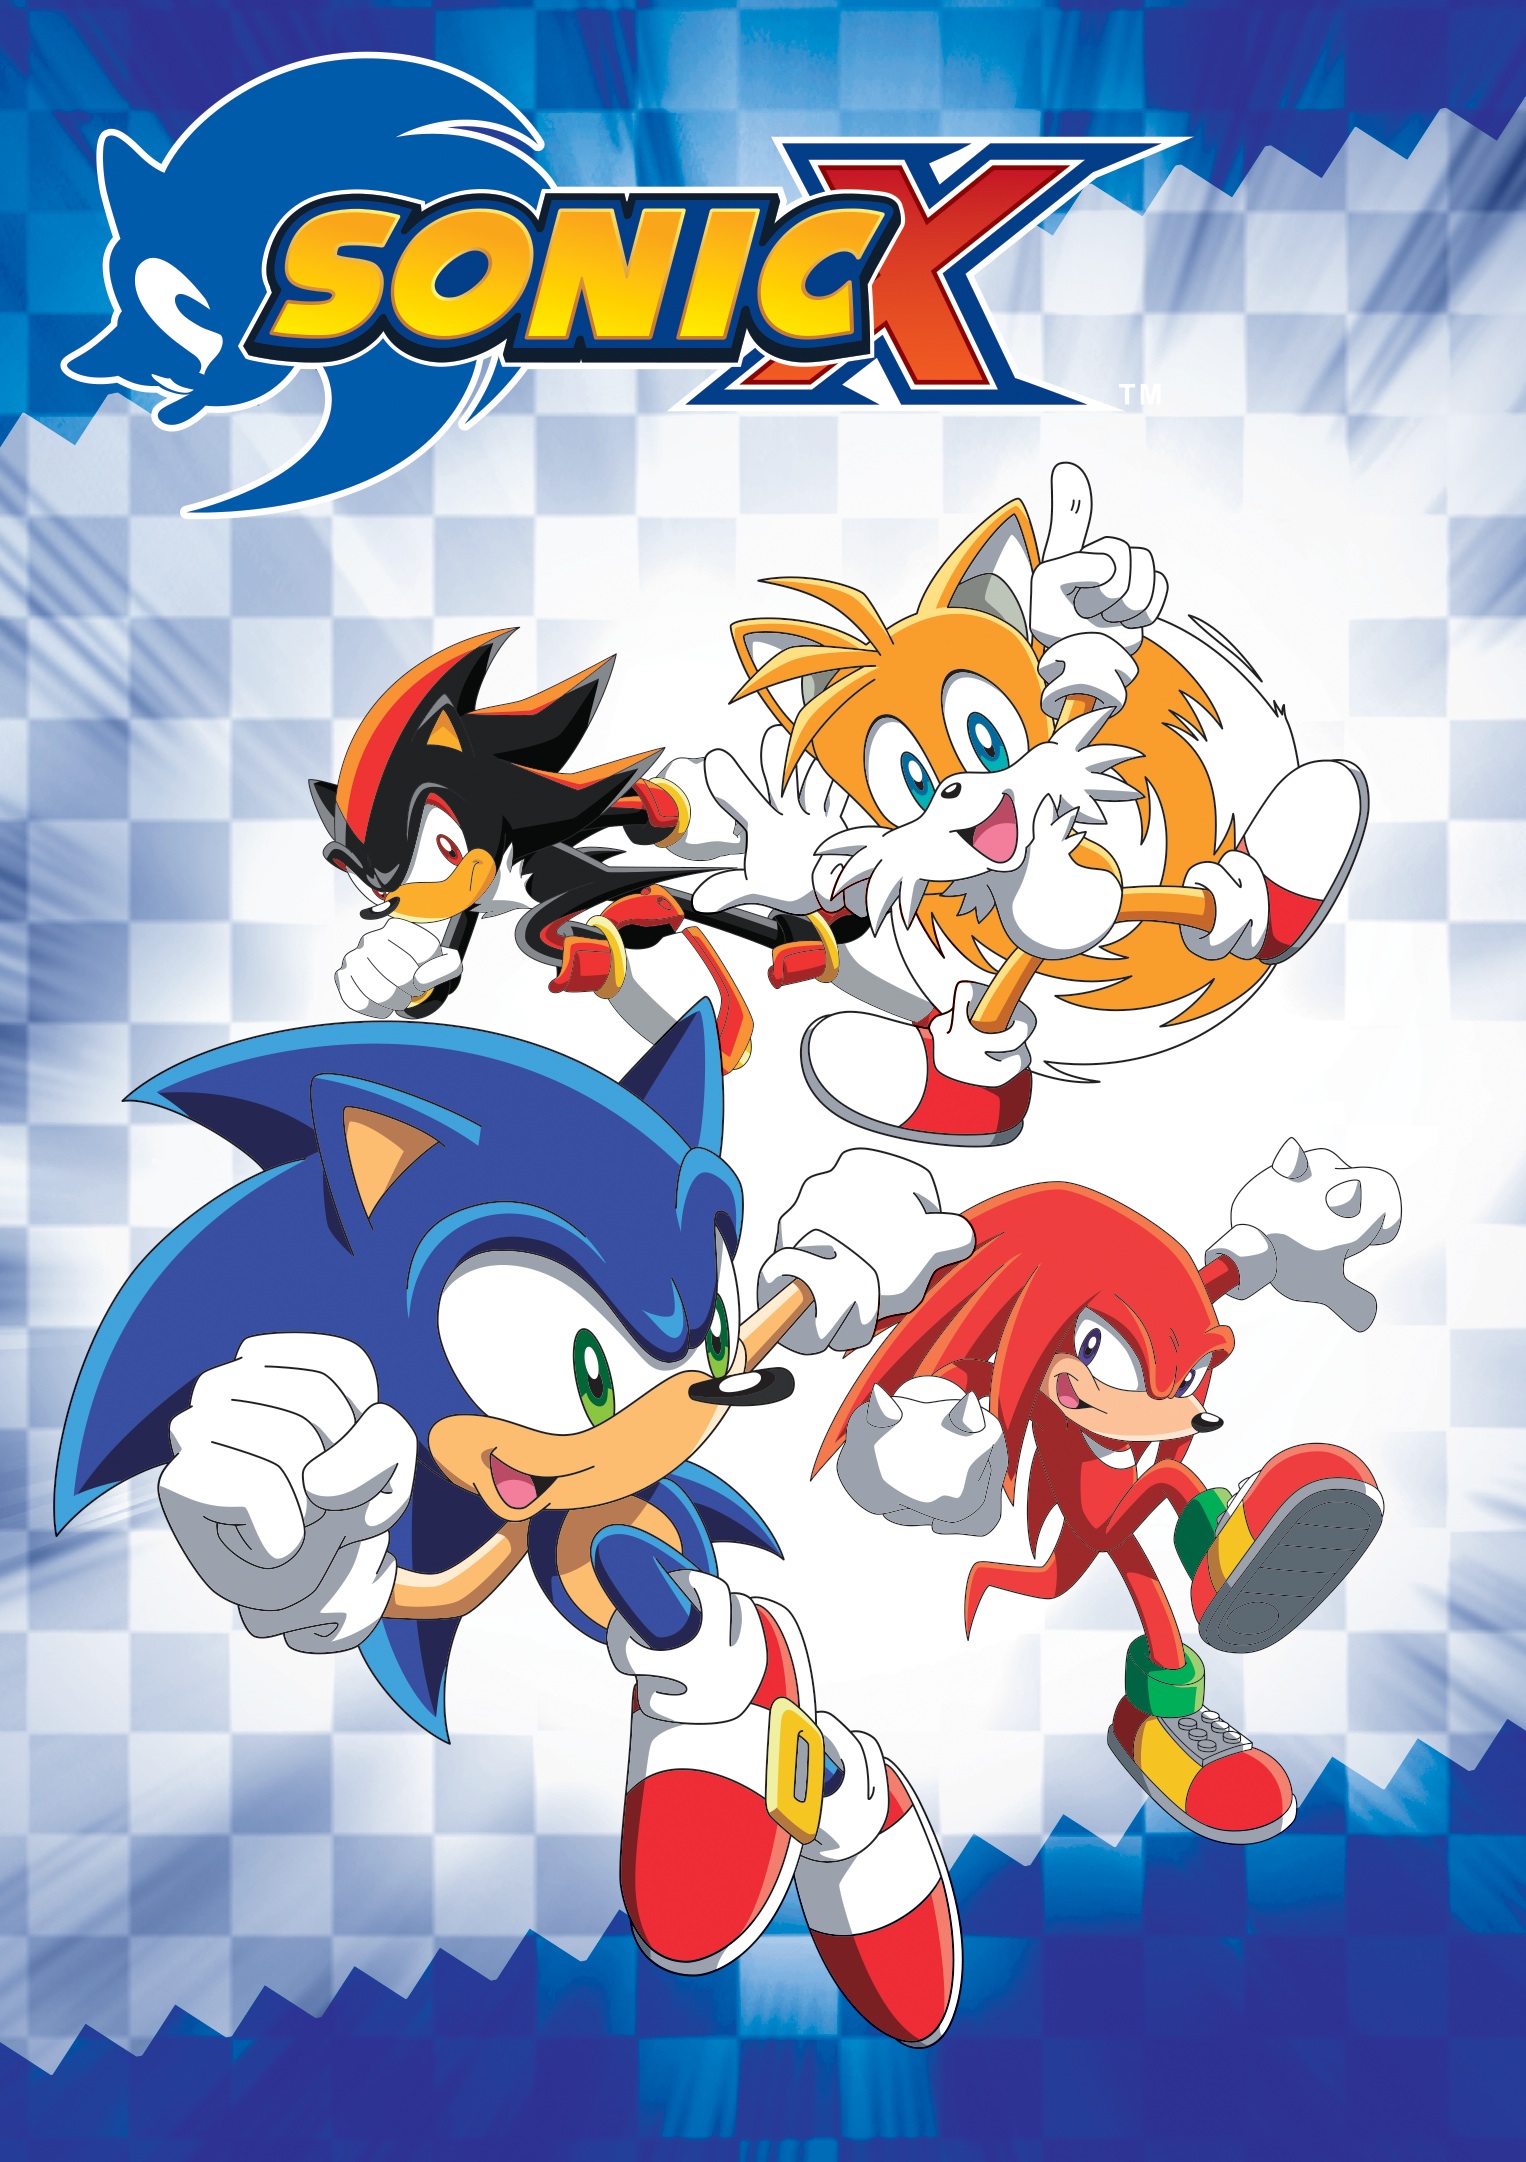 Verst vuist grind Sonic X: The Complete First and Second Season [8 Discs] [DVD] - Best Buy